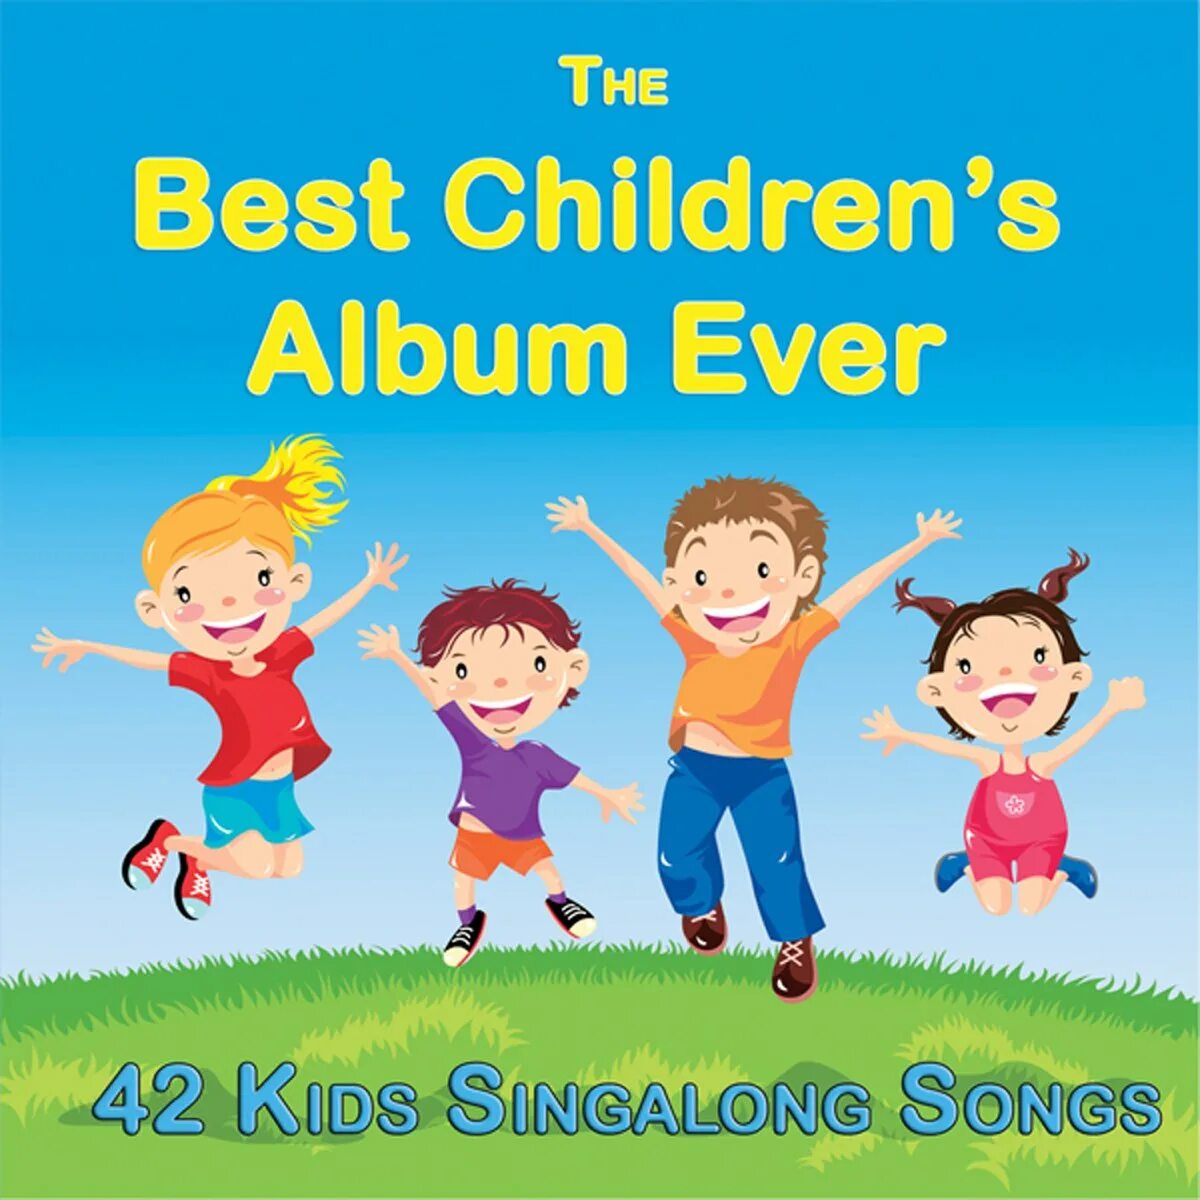 Better children. The good children. If you re Happy and you know it head Shoulders Knees and Toes finger Family. Children s album plaintive Song Свиридова о чем.